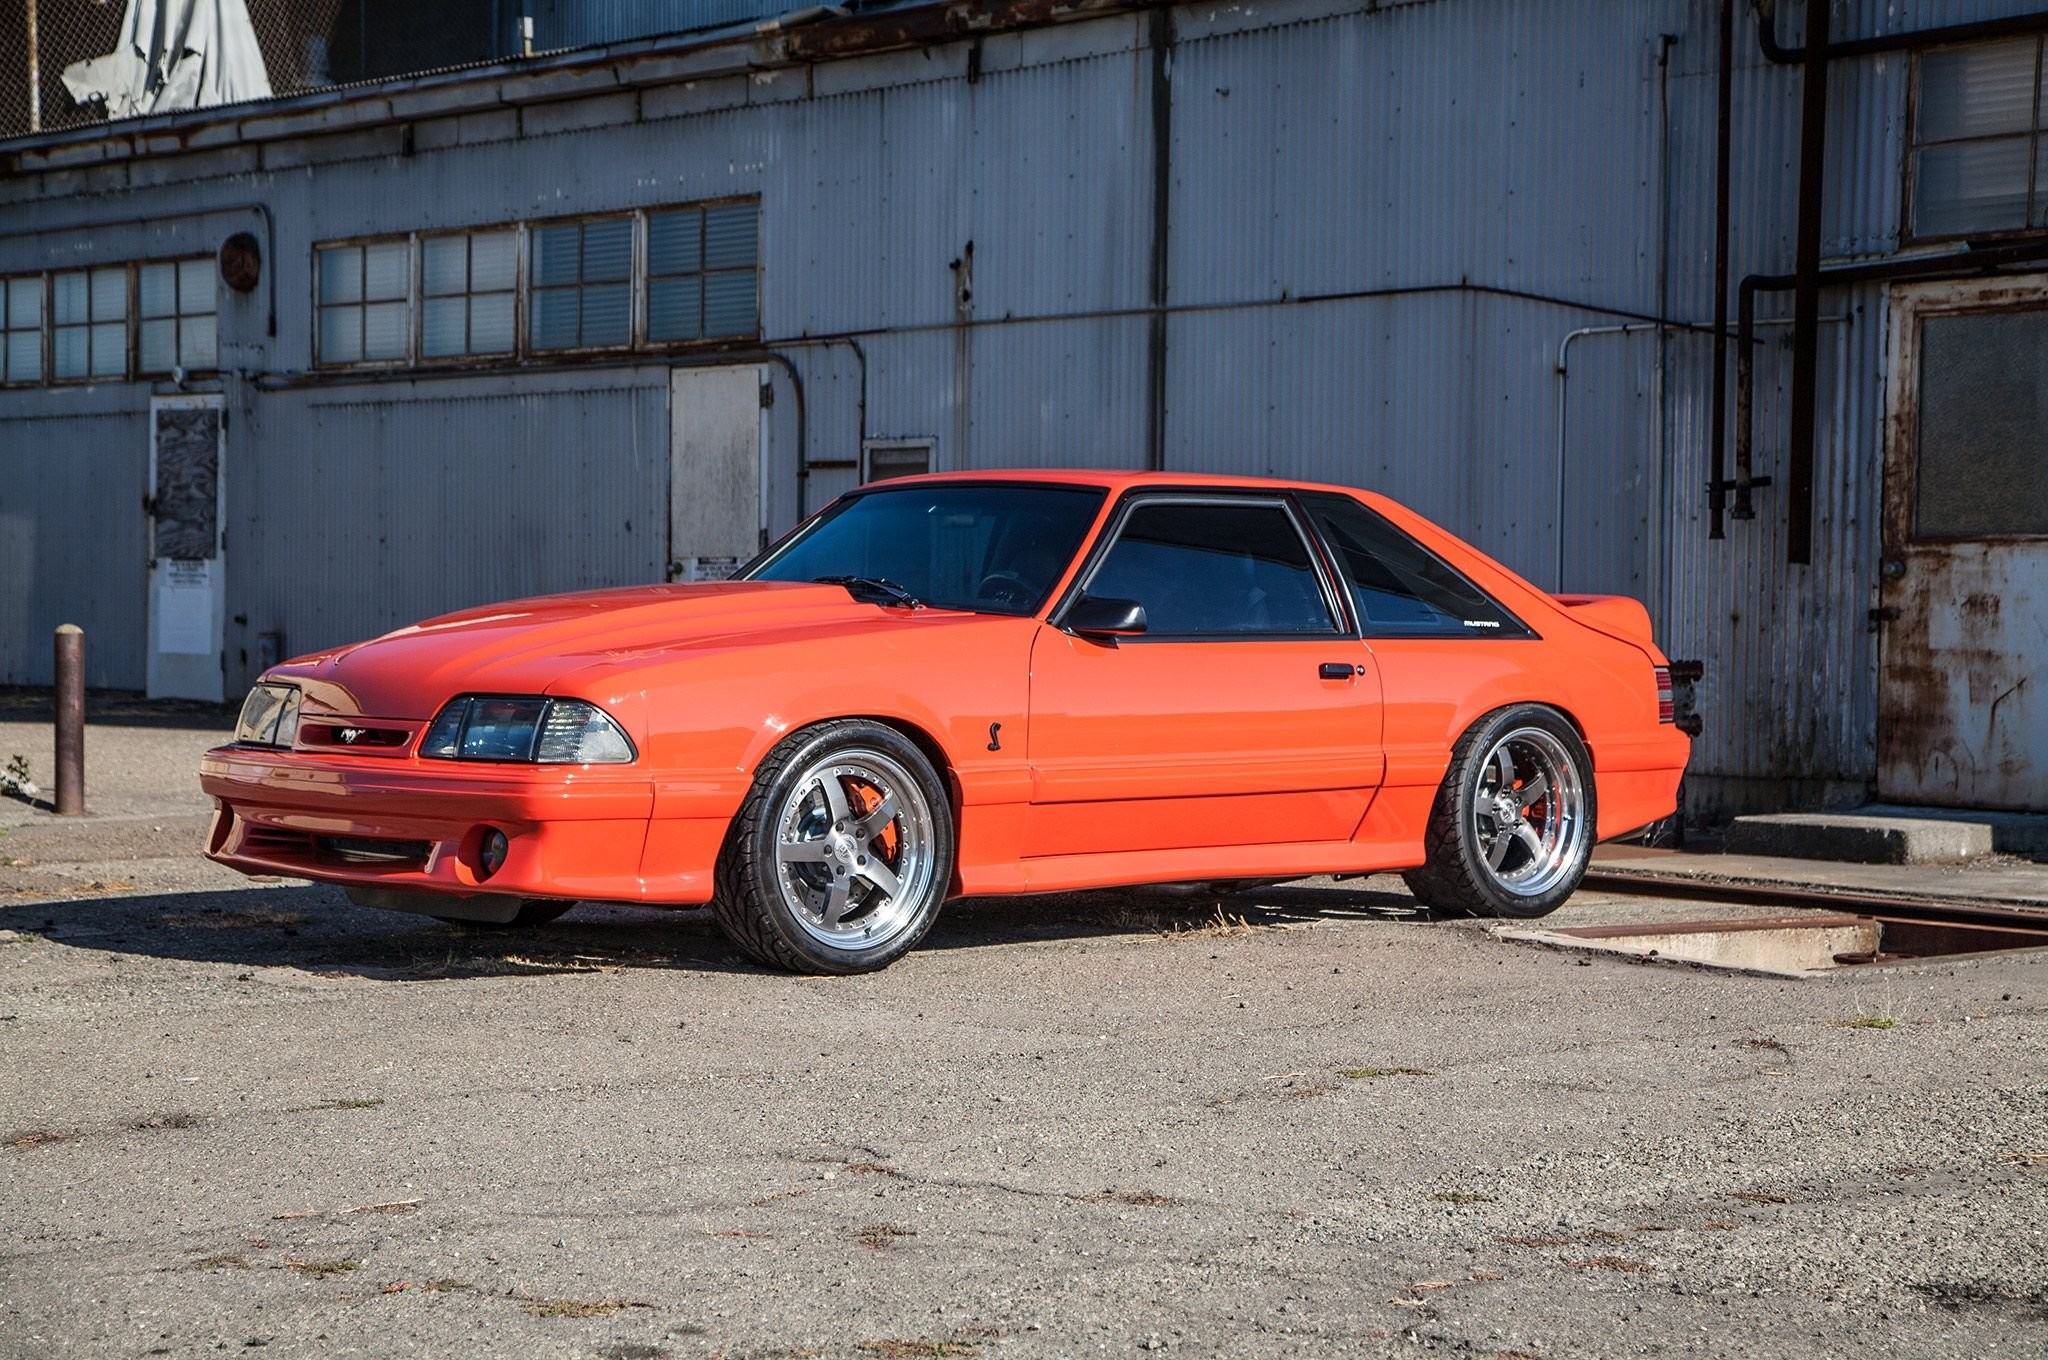 2048x1360 Terminator Swapped 1993 Fox Cobra Ford Mustang cars modified orange  wallpaper |  | 662243 | WallpaperUP